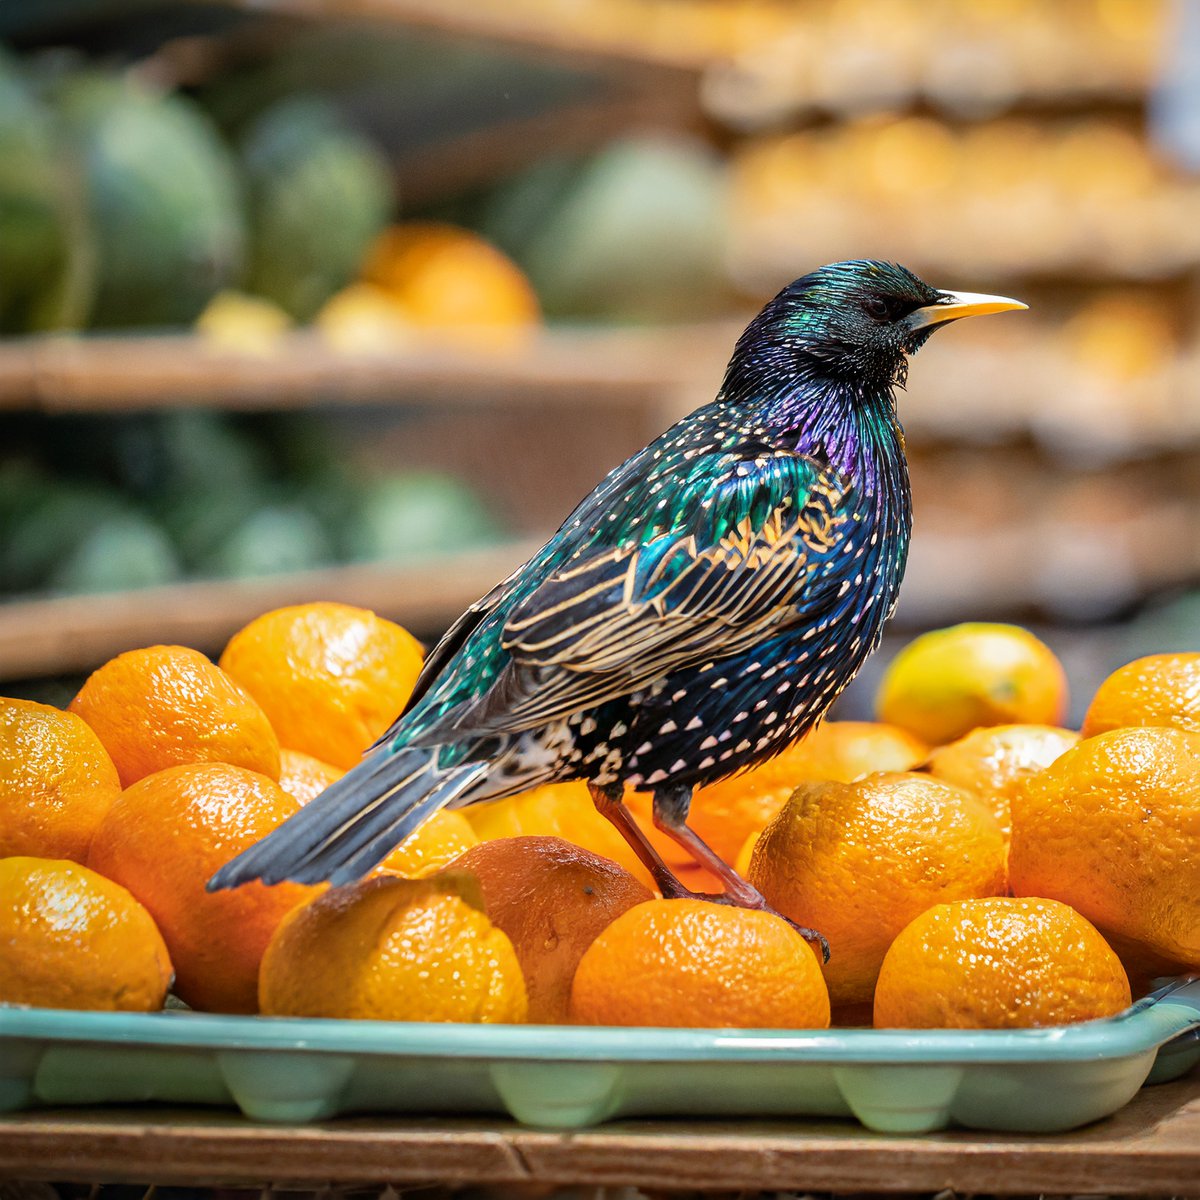 🐦 See a bird in your store? Report it using our 'Found a Bird' form. Your quick action keeps our spaces safe. Let's maintain a clean, bird-free environment together! 🏢✅ bit.ly/3PthIMd #ReportABird #KeepItSafe 🦜📝